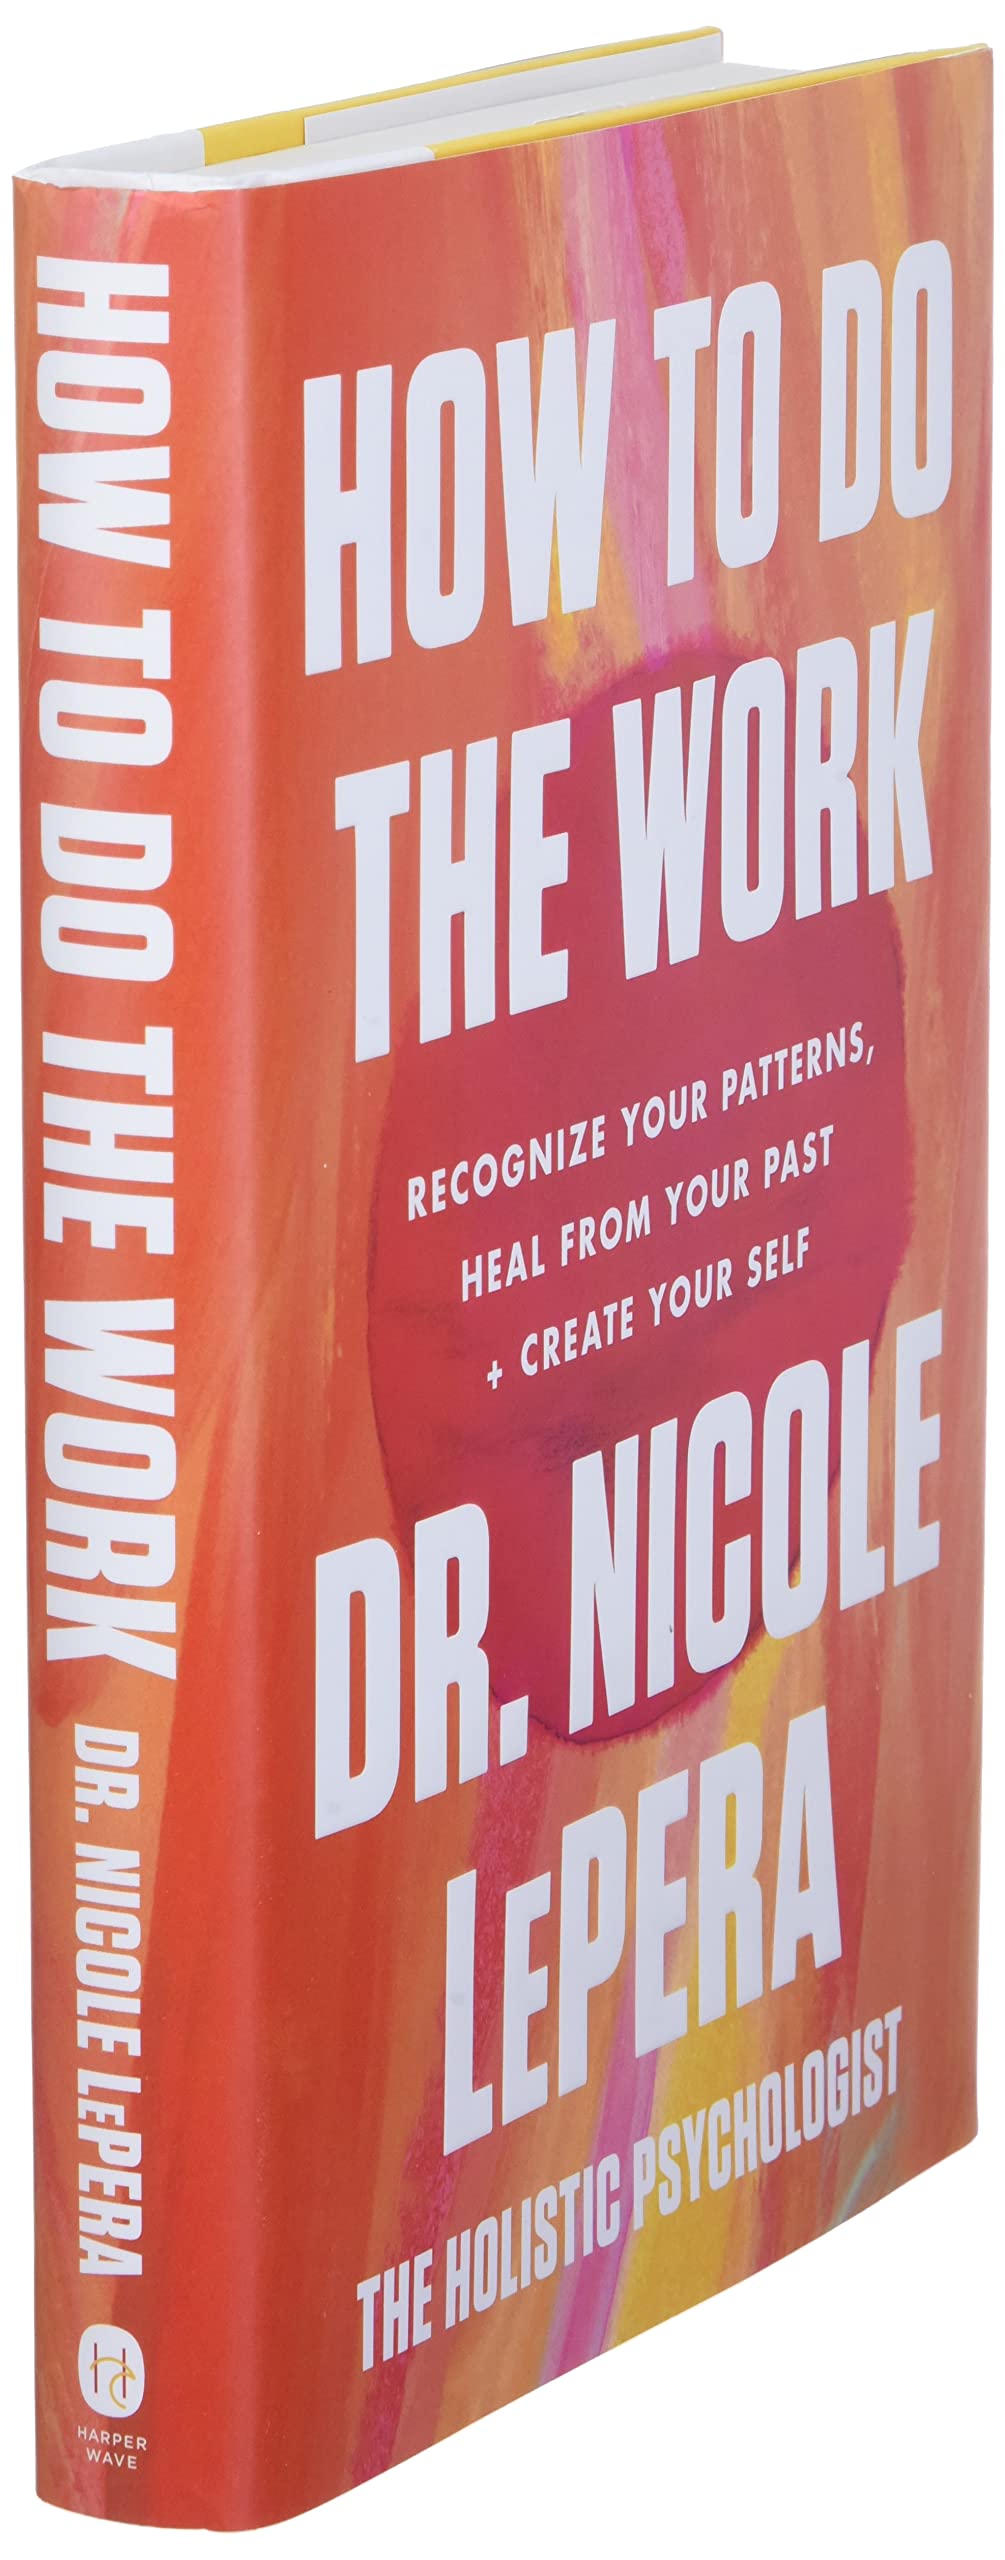 How to Do the Work: Recognize Your Patterns, Heal from Your Past, and Create Your Self by Dr. Nicole LePera